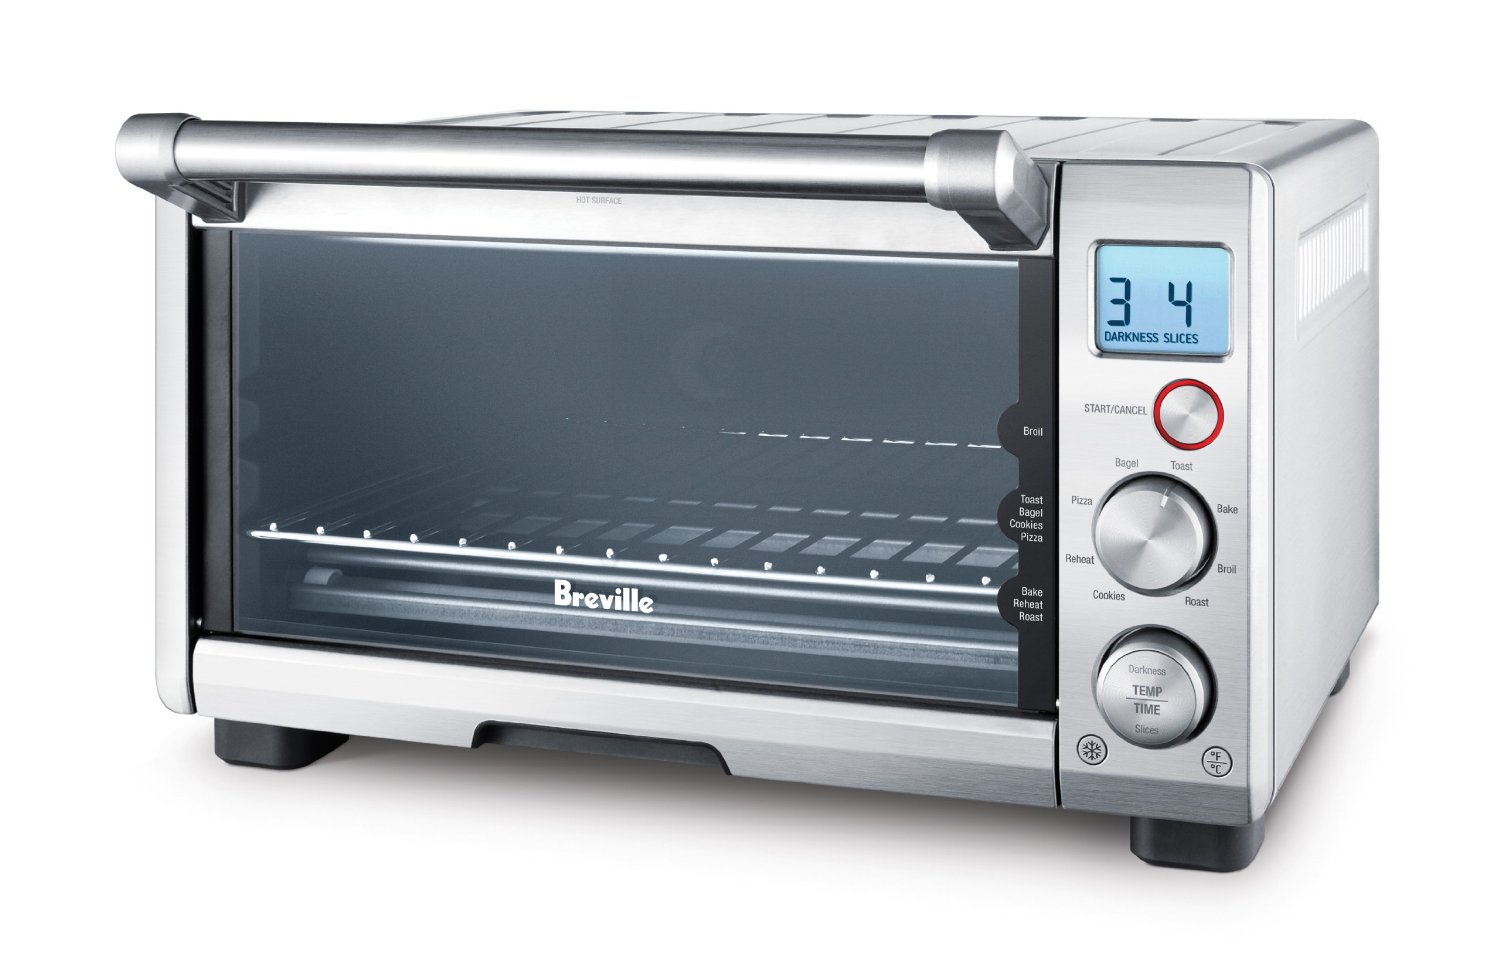 Cheap Price Breville BOV650XL The Compact Smart Oven 1800-Watt Toaster Oven with Element IQ รูปที่ 1